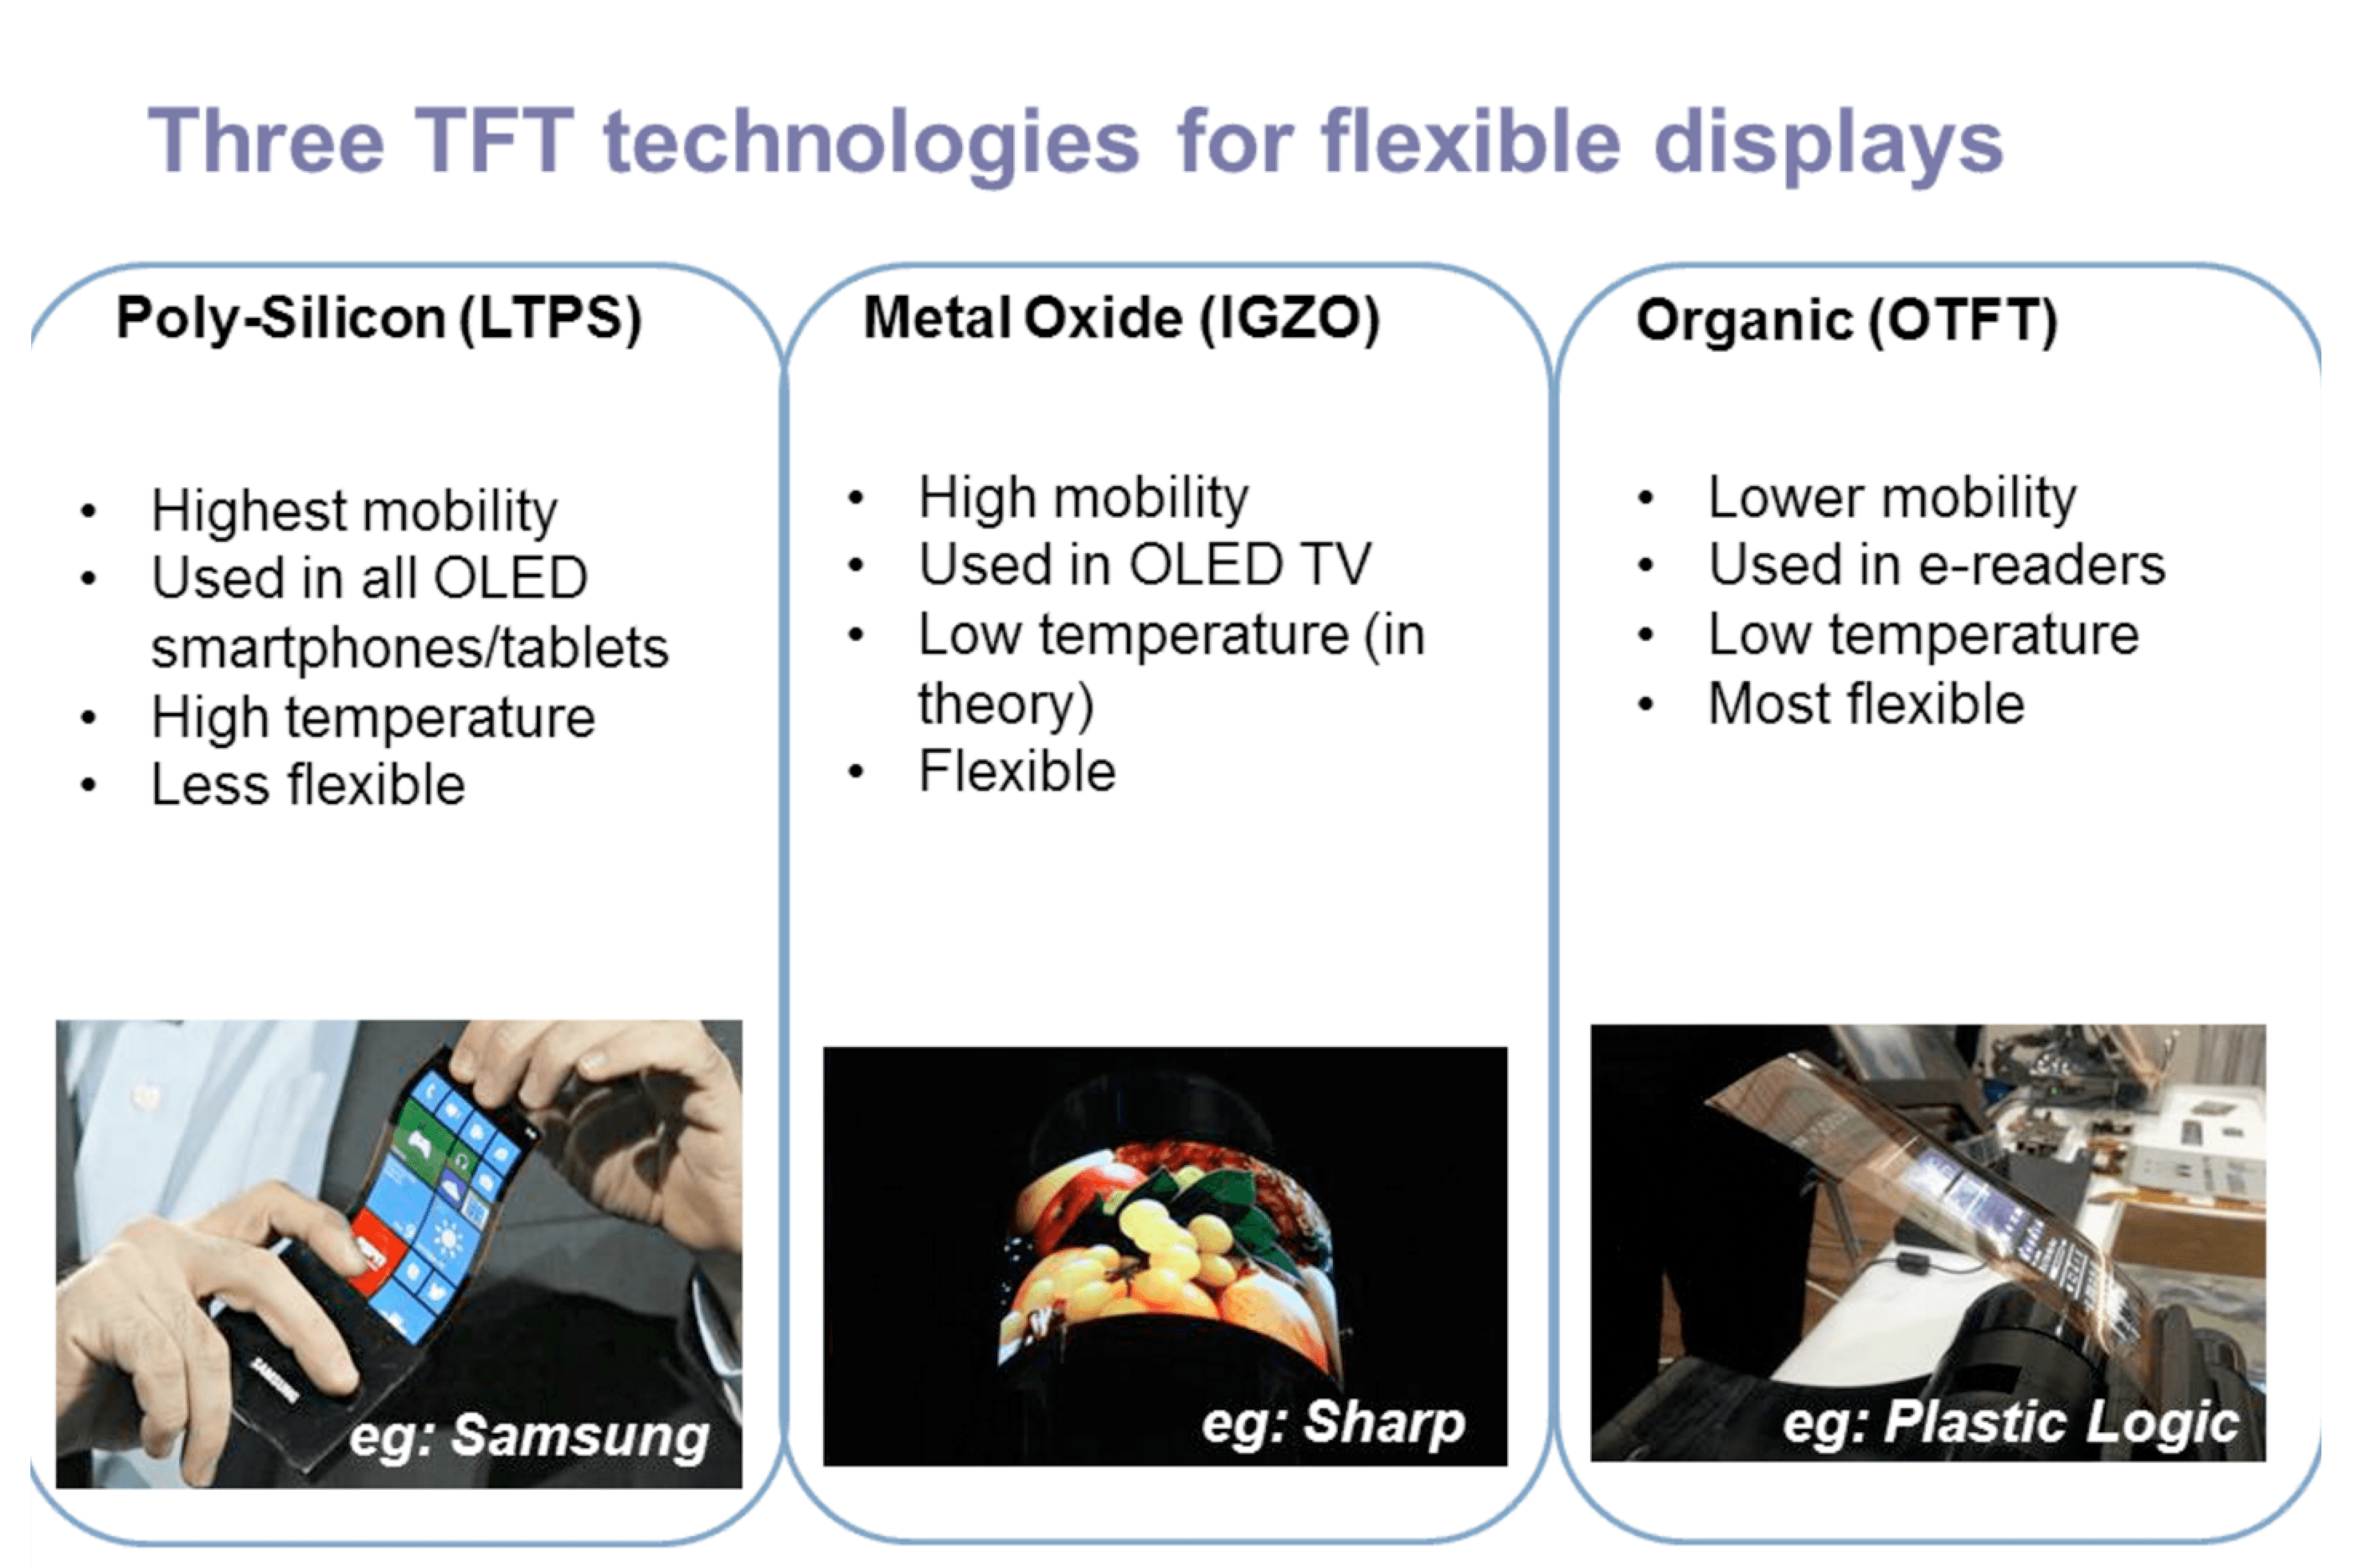 TFT types for flexible displays